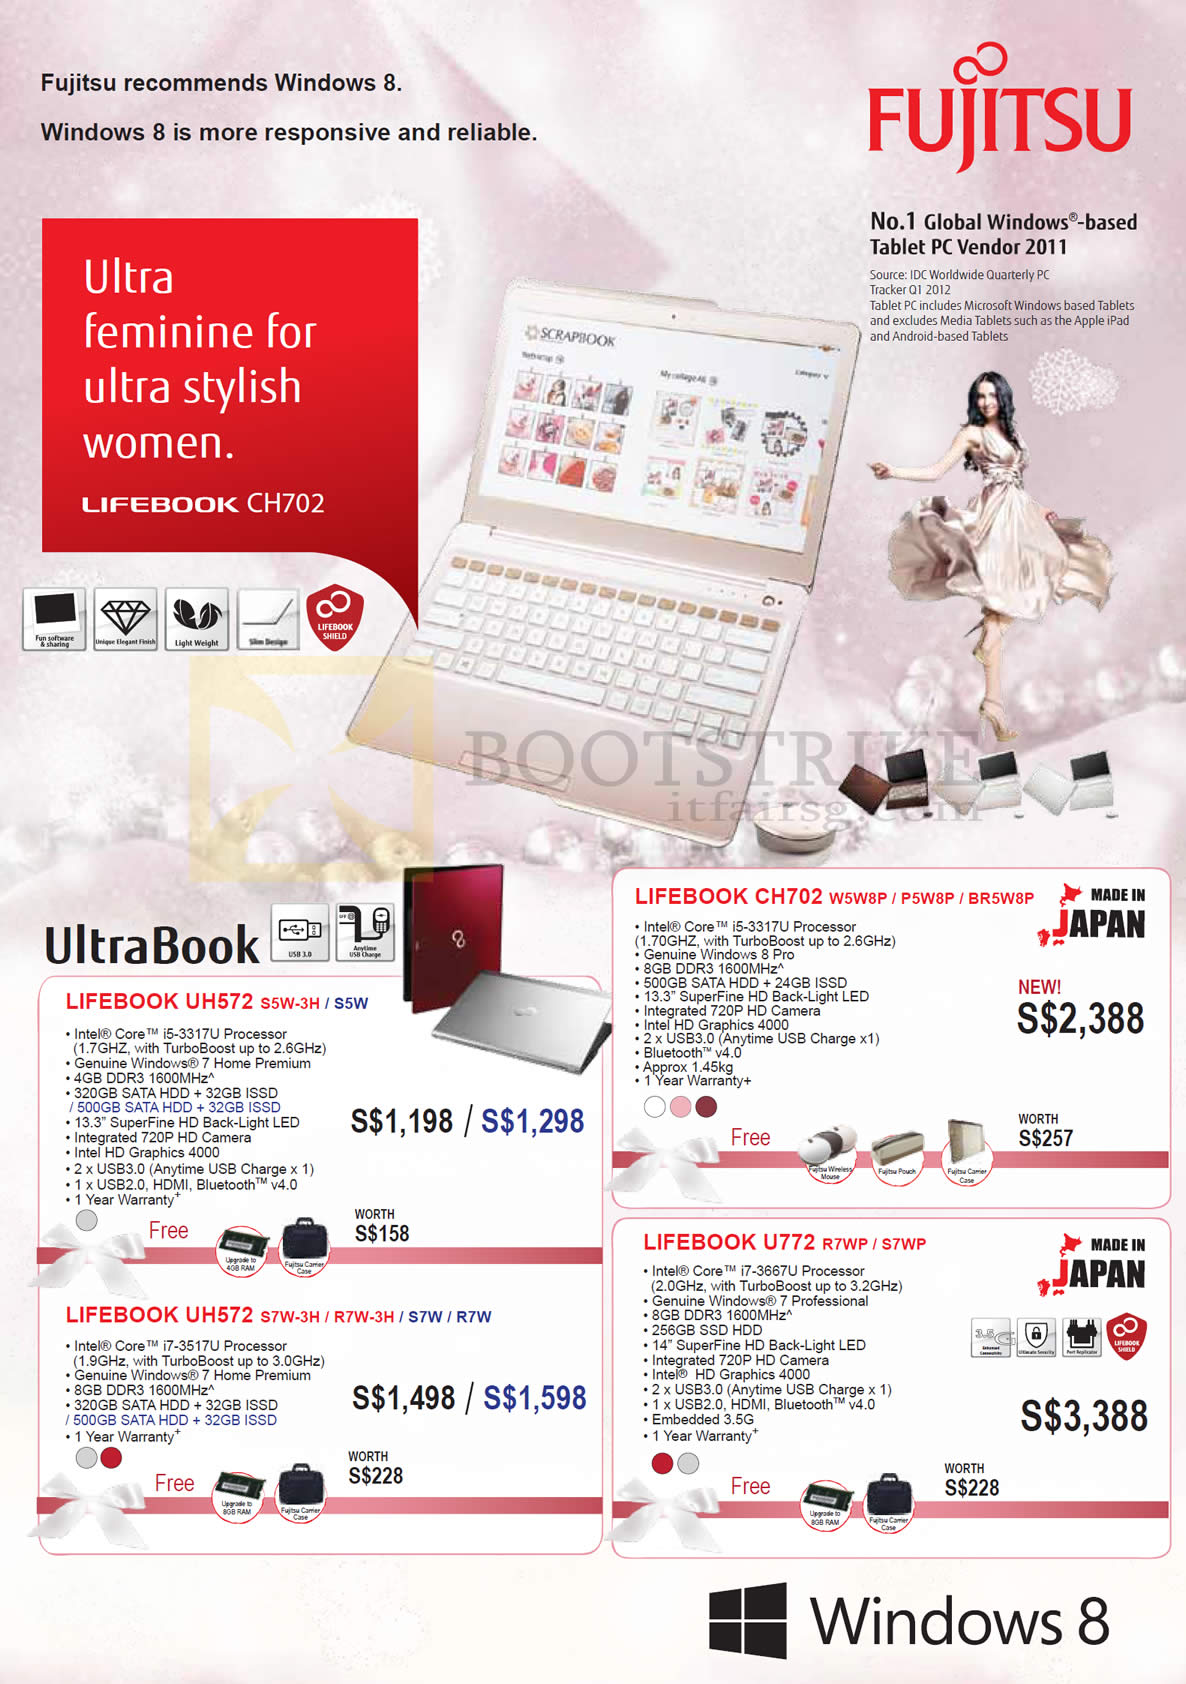 SITEX 2012 price list image brochure of Asiapac Fujitsu Ultrabook Notebooks Lifebook UH572 S5W-3H S5W, CH702 W5W8P P5W8P BR5W8P, UH572 S7W-3H R7W-3H S7W R7W, U772 R7WP S7WP